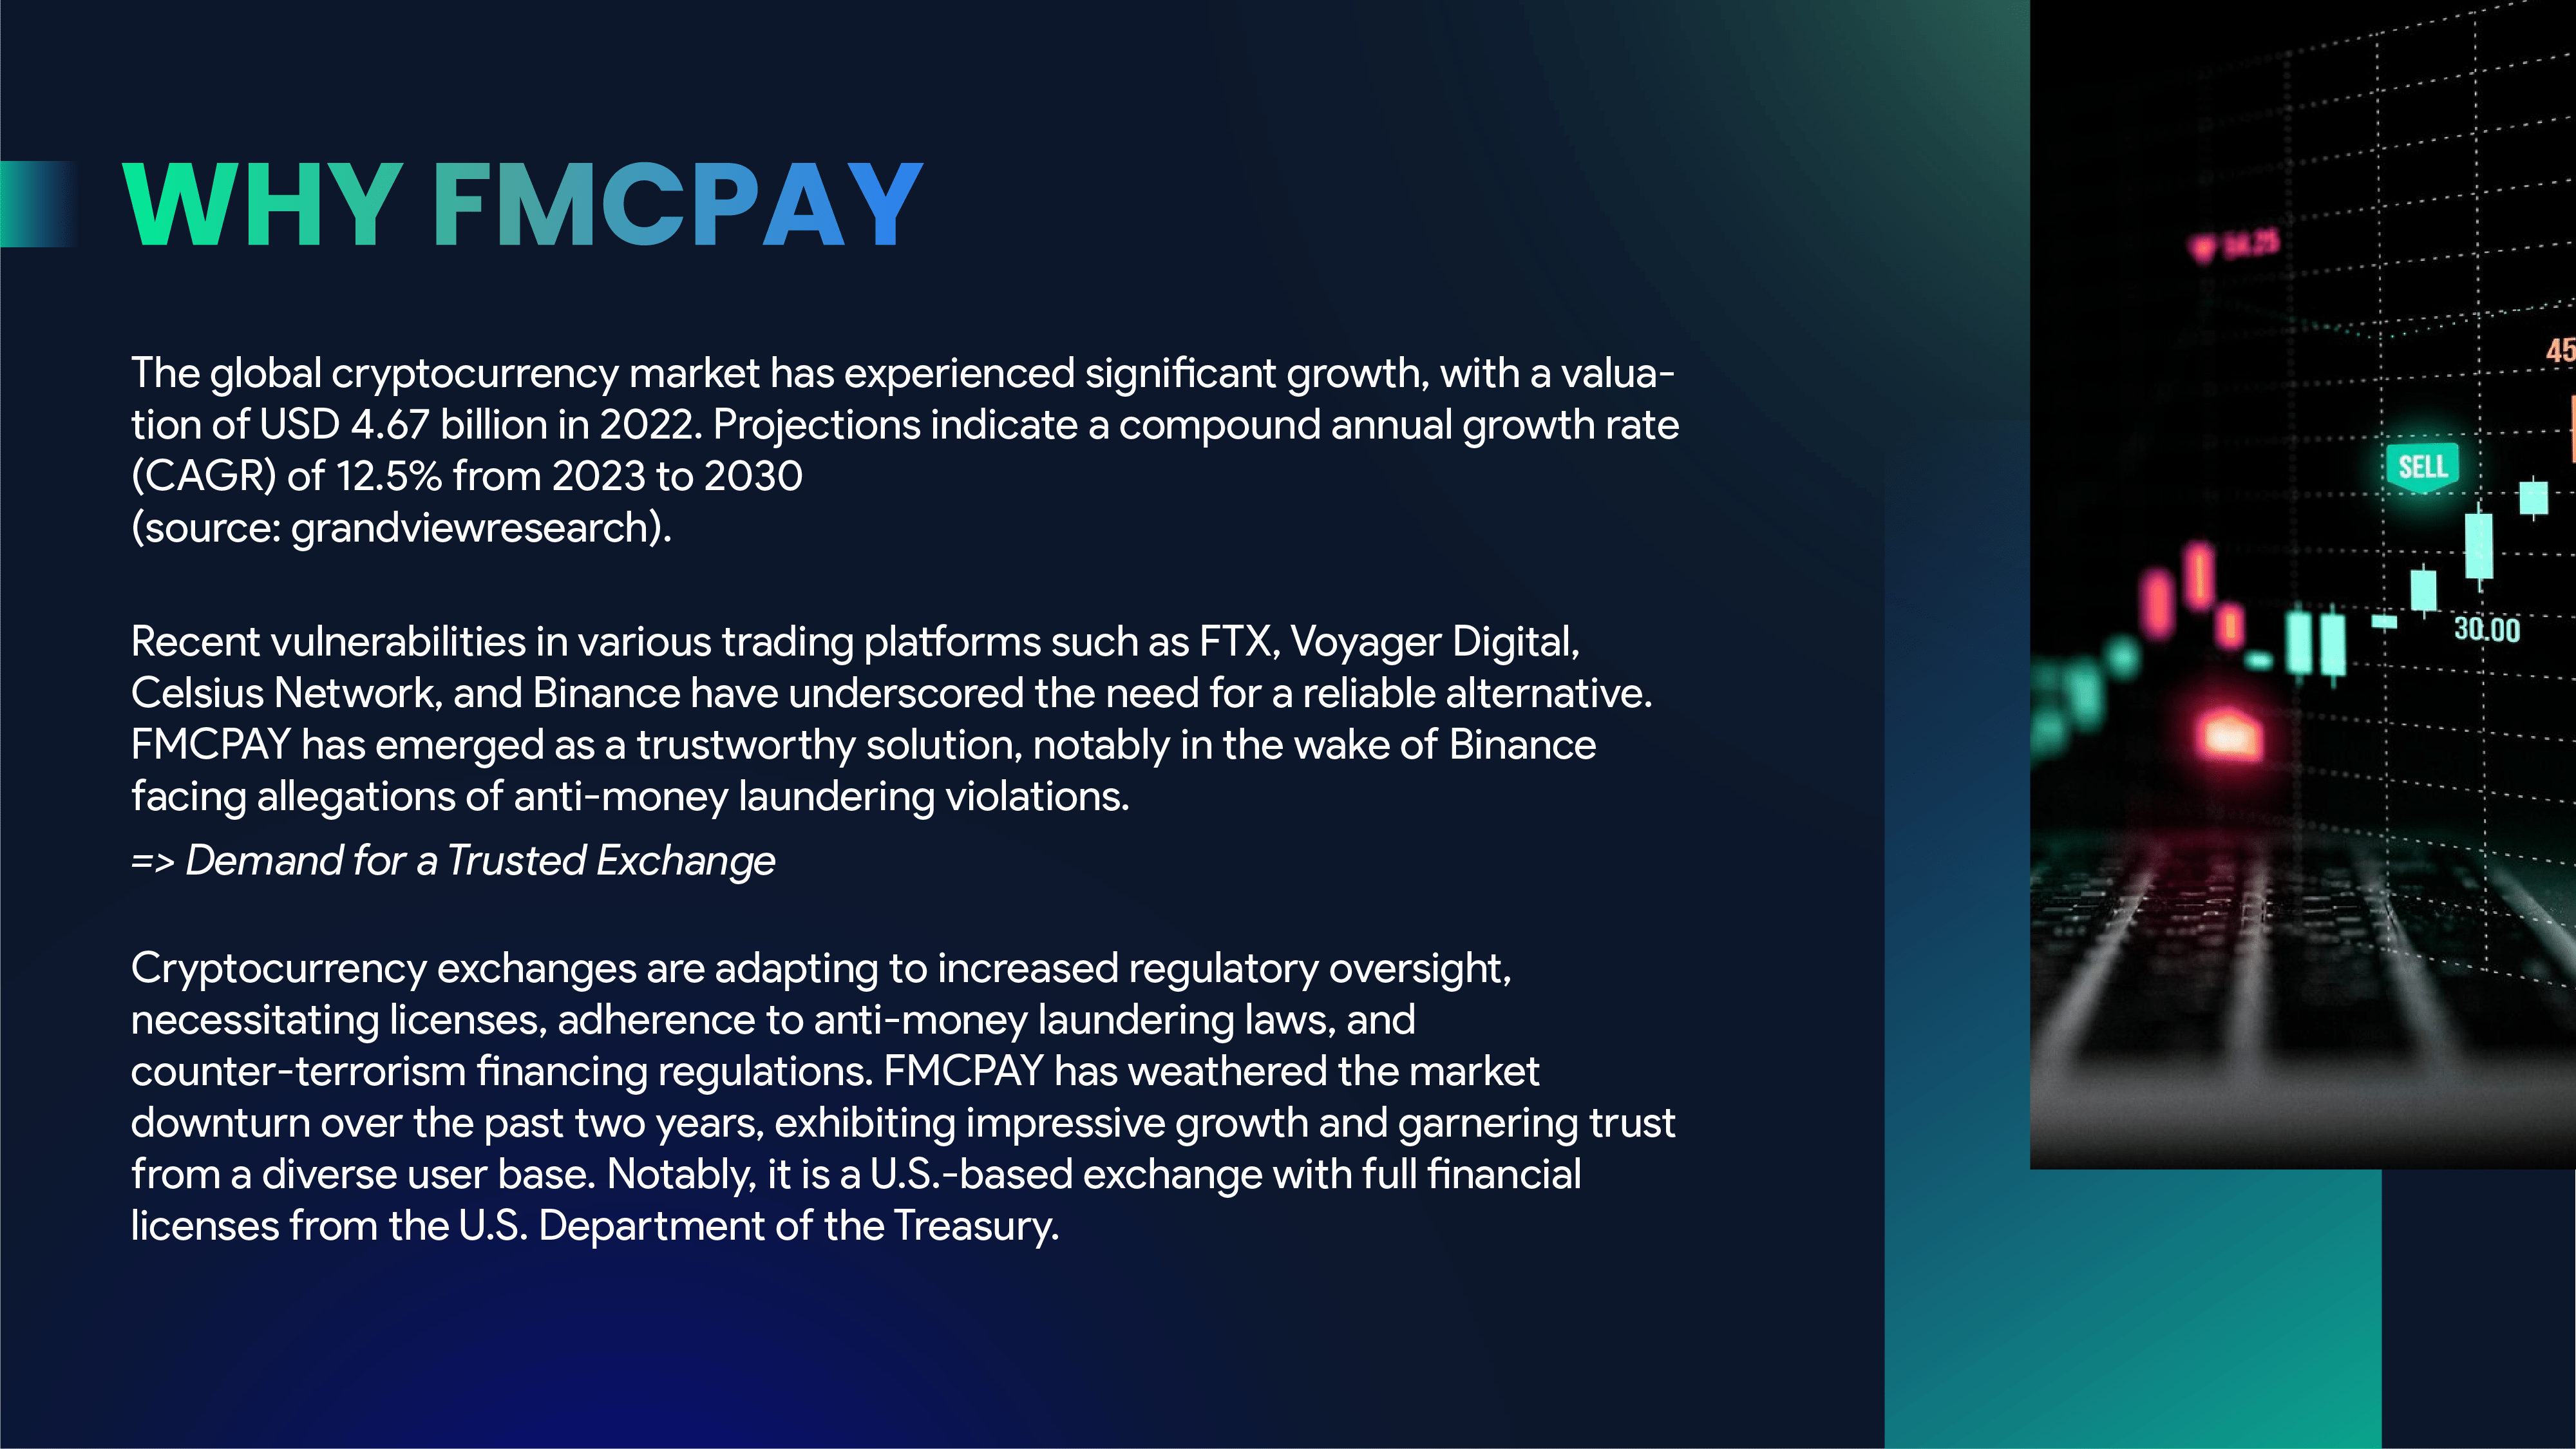 What is FMCPAY?